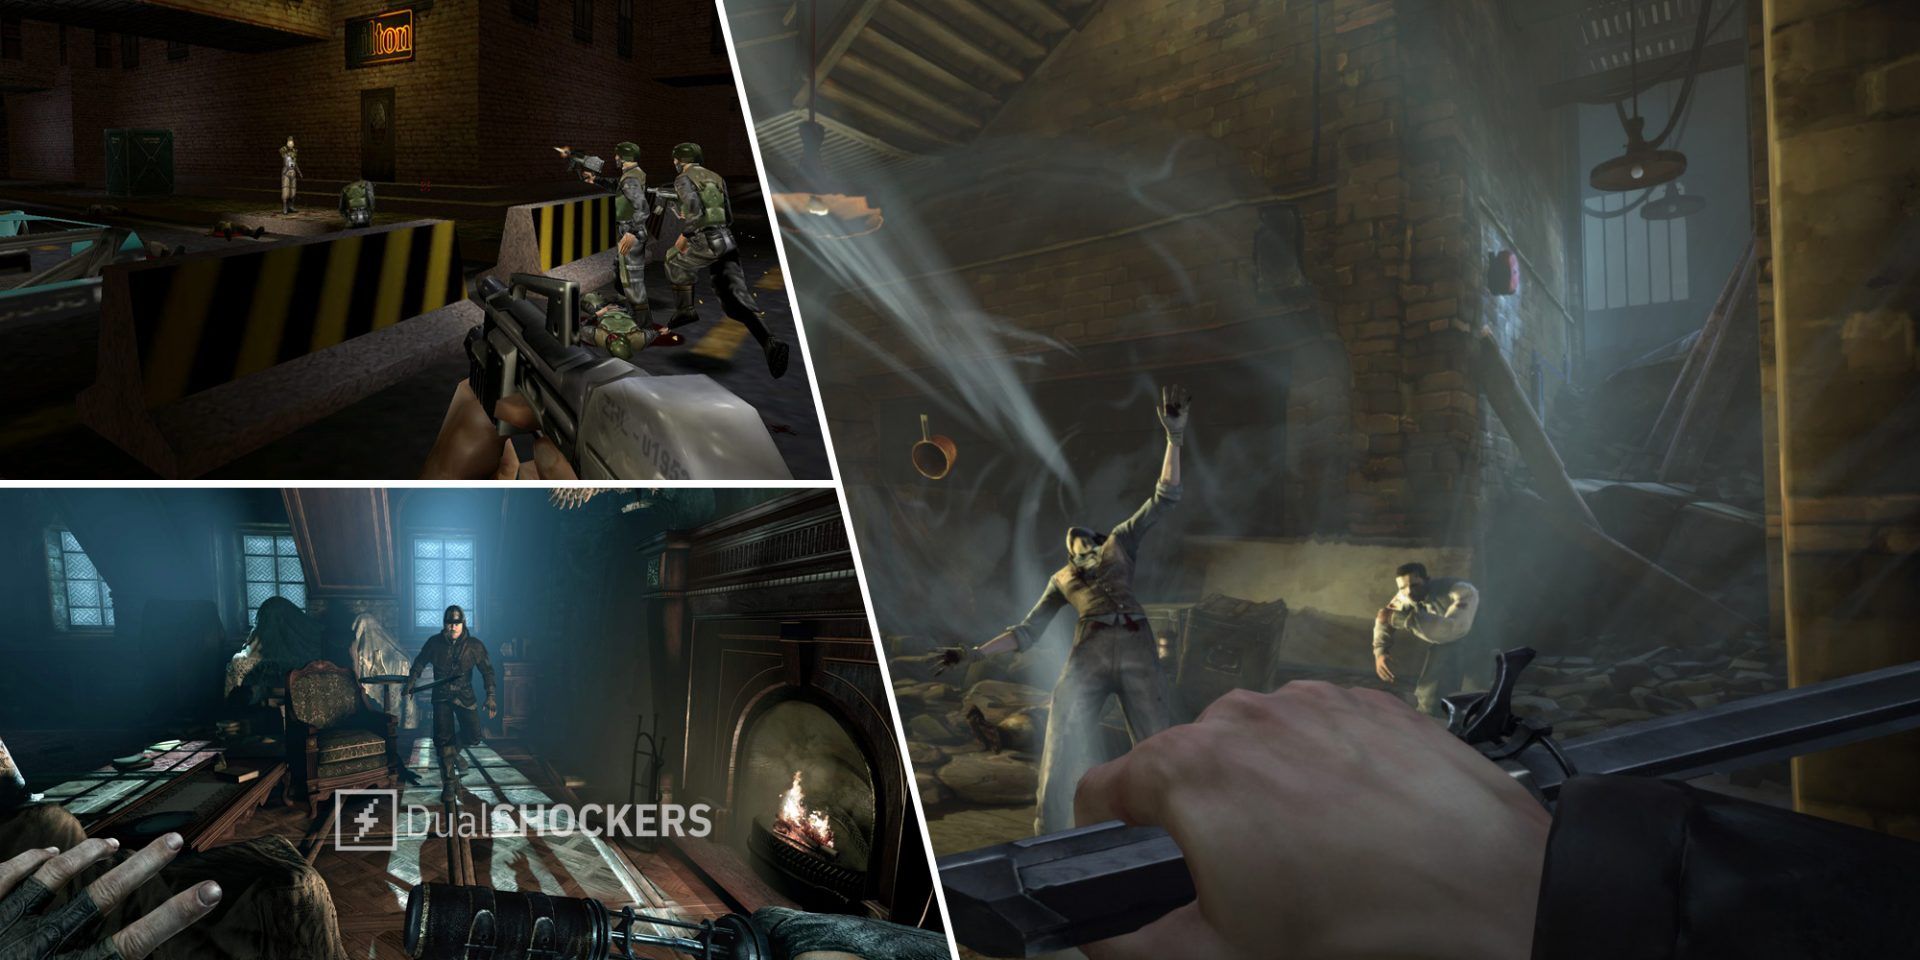 Deus Ex on top left, Thief on bottom left, Dishonored on right